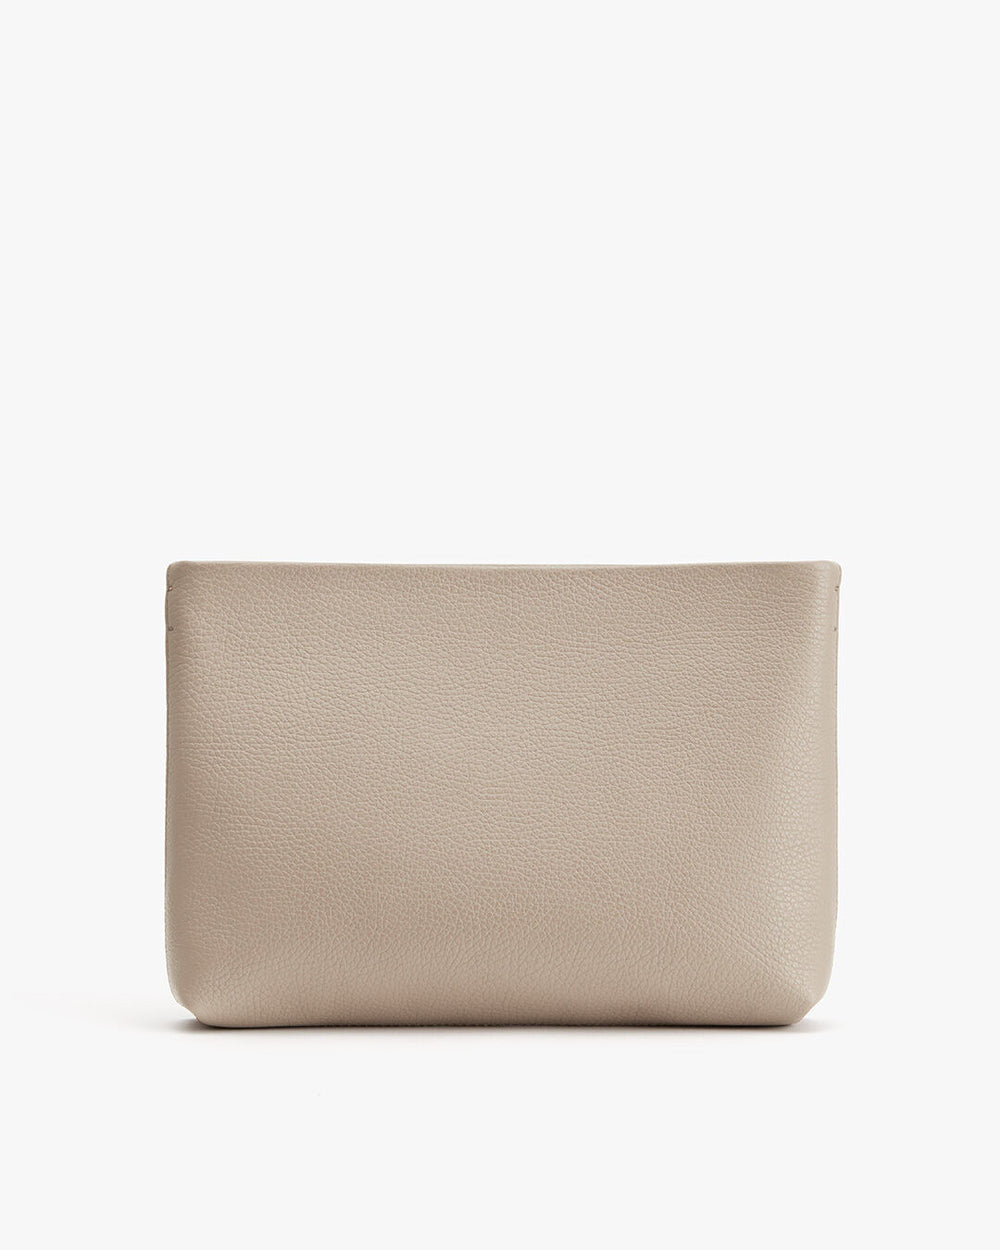 Small zippered pouch on a plain background